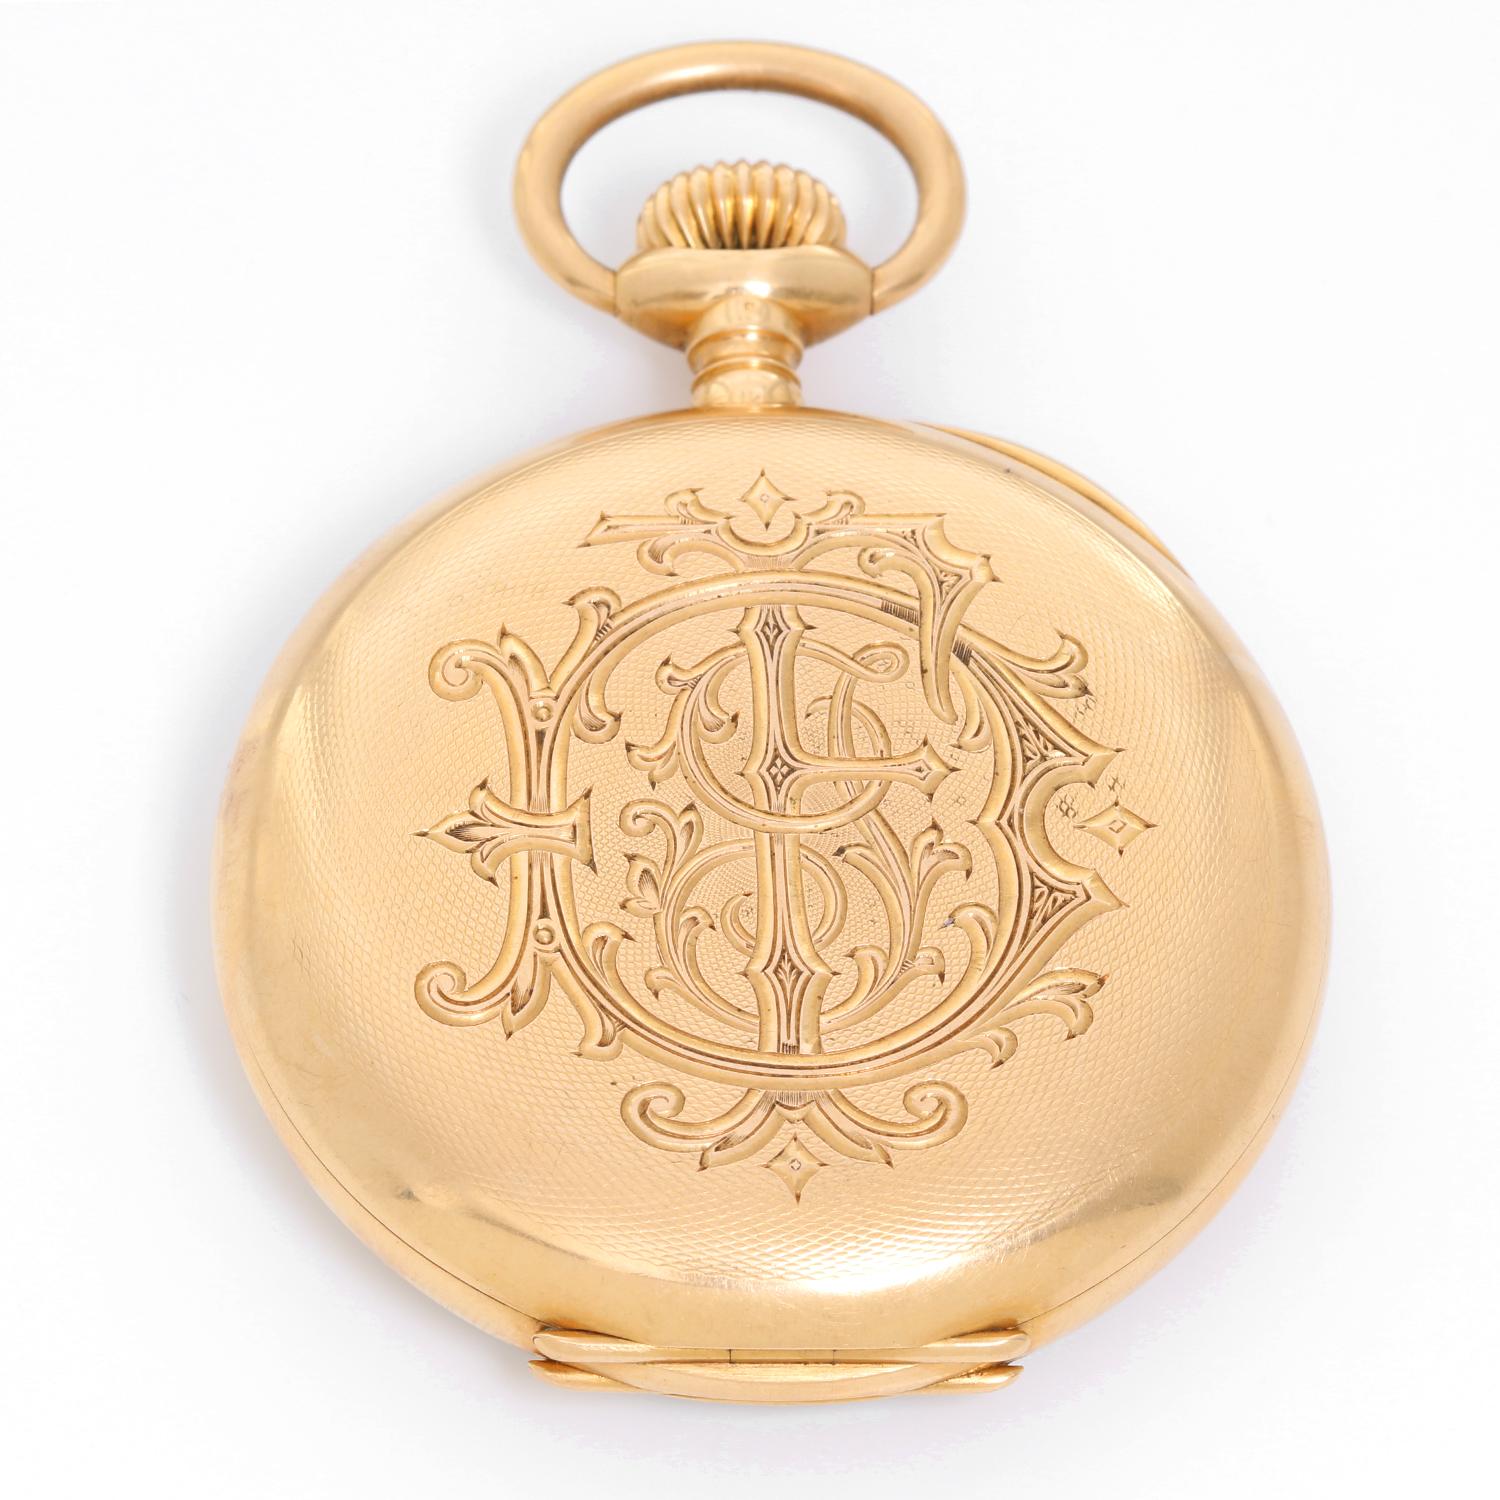 Vintage Patek Philippe Gondolo 18k Yellow Gold Open Face Pocket Watch -  Manual winding. Huge 18k yellow case with very unique raised design on case back  (55mm diameter). Single sunk dial porcelain with black Roman numerals. Pre-owned, vintage